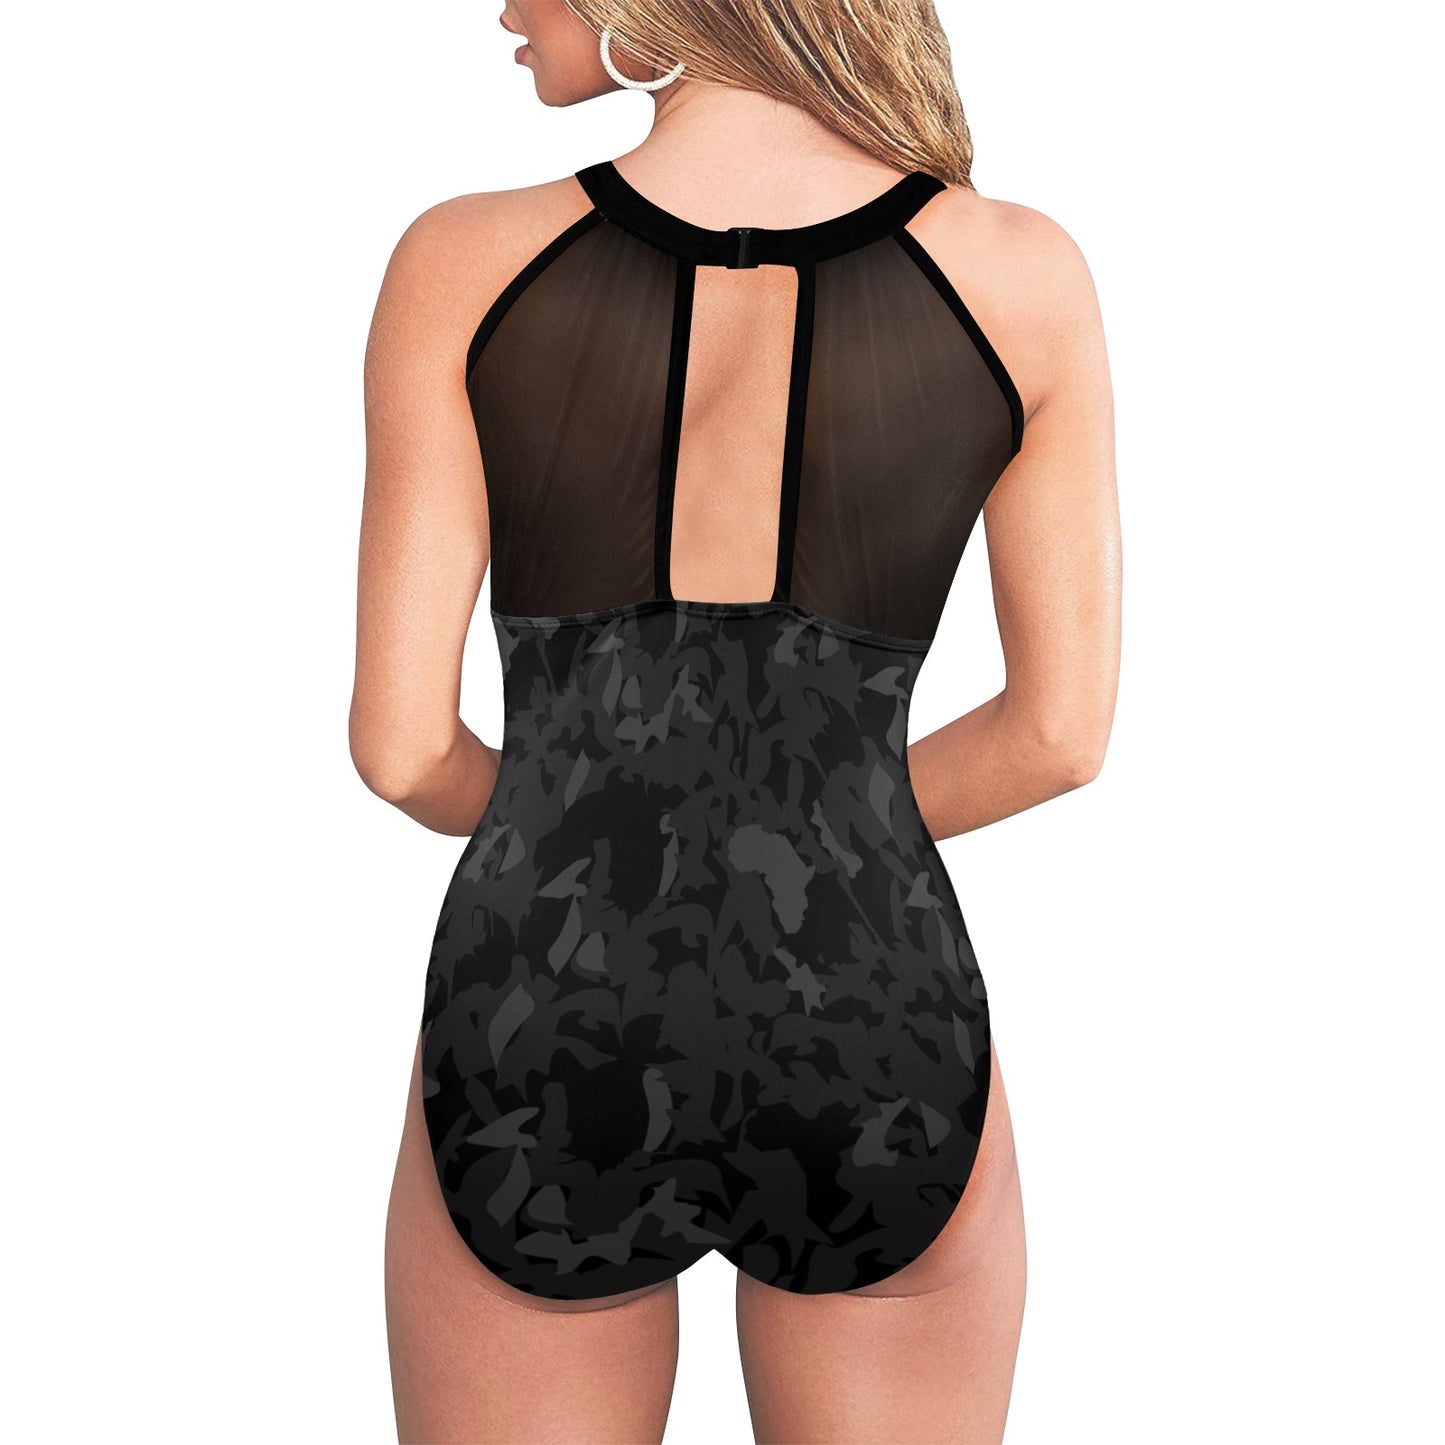 Black Camouflage High Neck Mesh Plunge One-piece Ruched Swimsuit